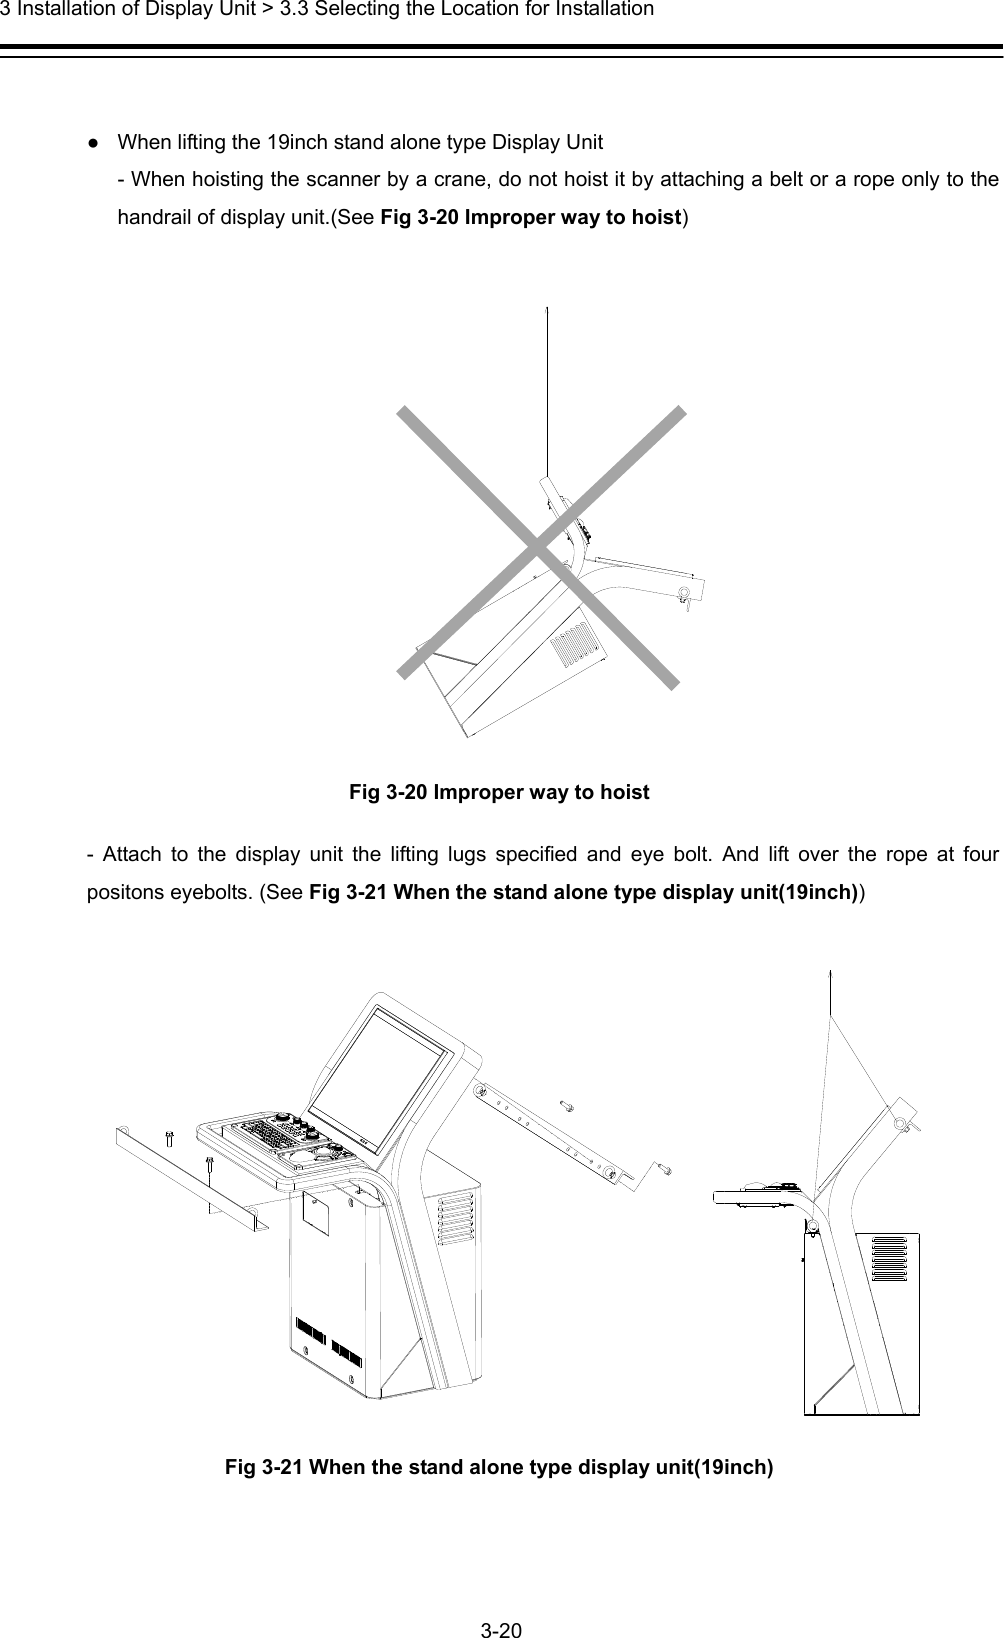  3 Installation of Display Unit &gt; 3.3 Selecting the Location for Installation 3-20   ●  When lifting the 19inch stand alone type Display Unit - When hoisting the scanner by a crane, do not hoist it by attaching a belt or a rope only to the handrail of display unit.(See Fig 3-20 Improper way to hoist)   Fig 3-20 Improper way to hoist - Attach to the display unit the lifting lugs specified and eye bolt. And lift over the rope at four positons eyebolts. (See Fig 3-21 When the stand alone type display unit(19inch))   Fig 3-21 When the stand alone type display unit(19inch) 